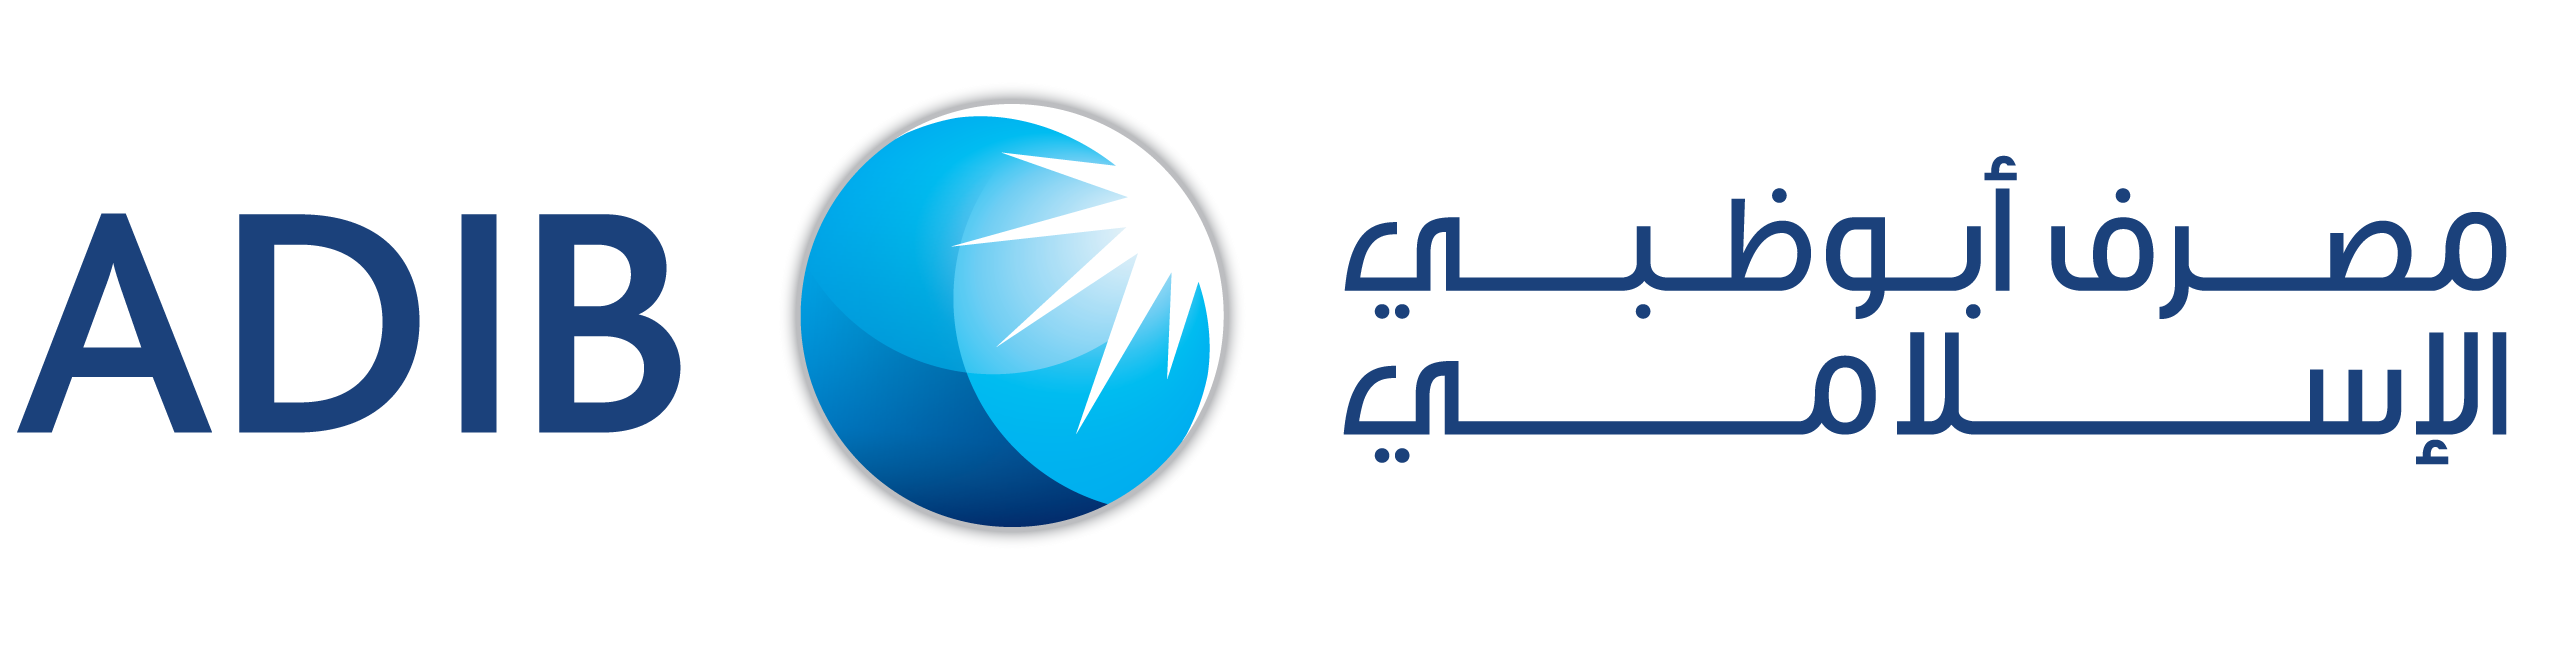 ADIB Contributes AED25 Million To Ma’an ‘Together We Are Good’ Programme